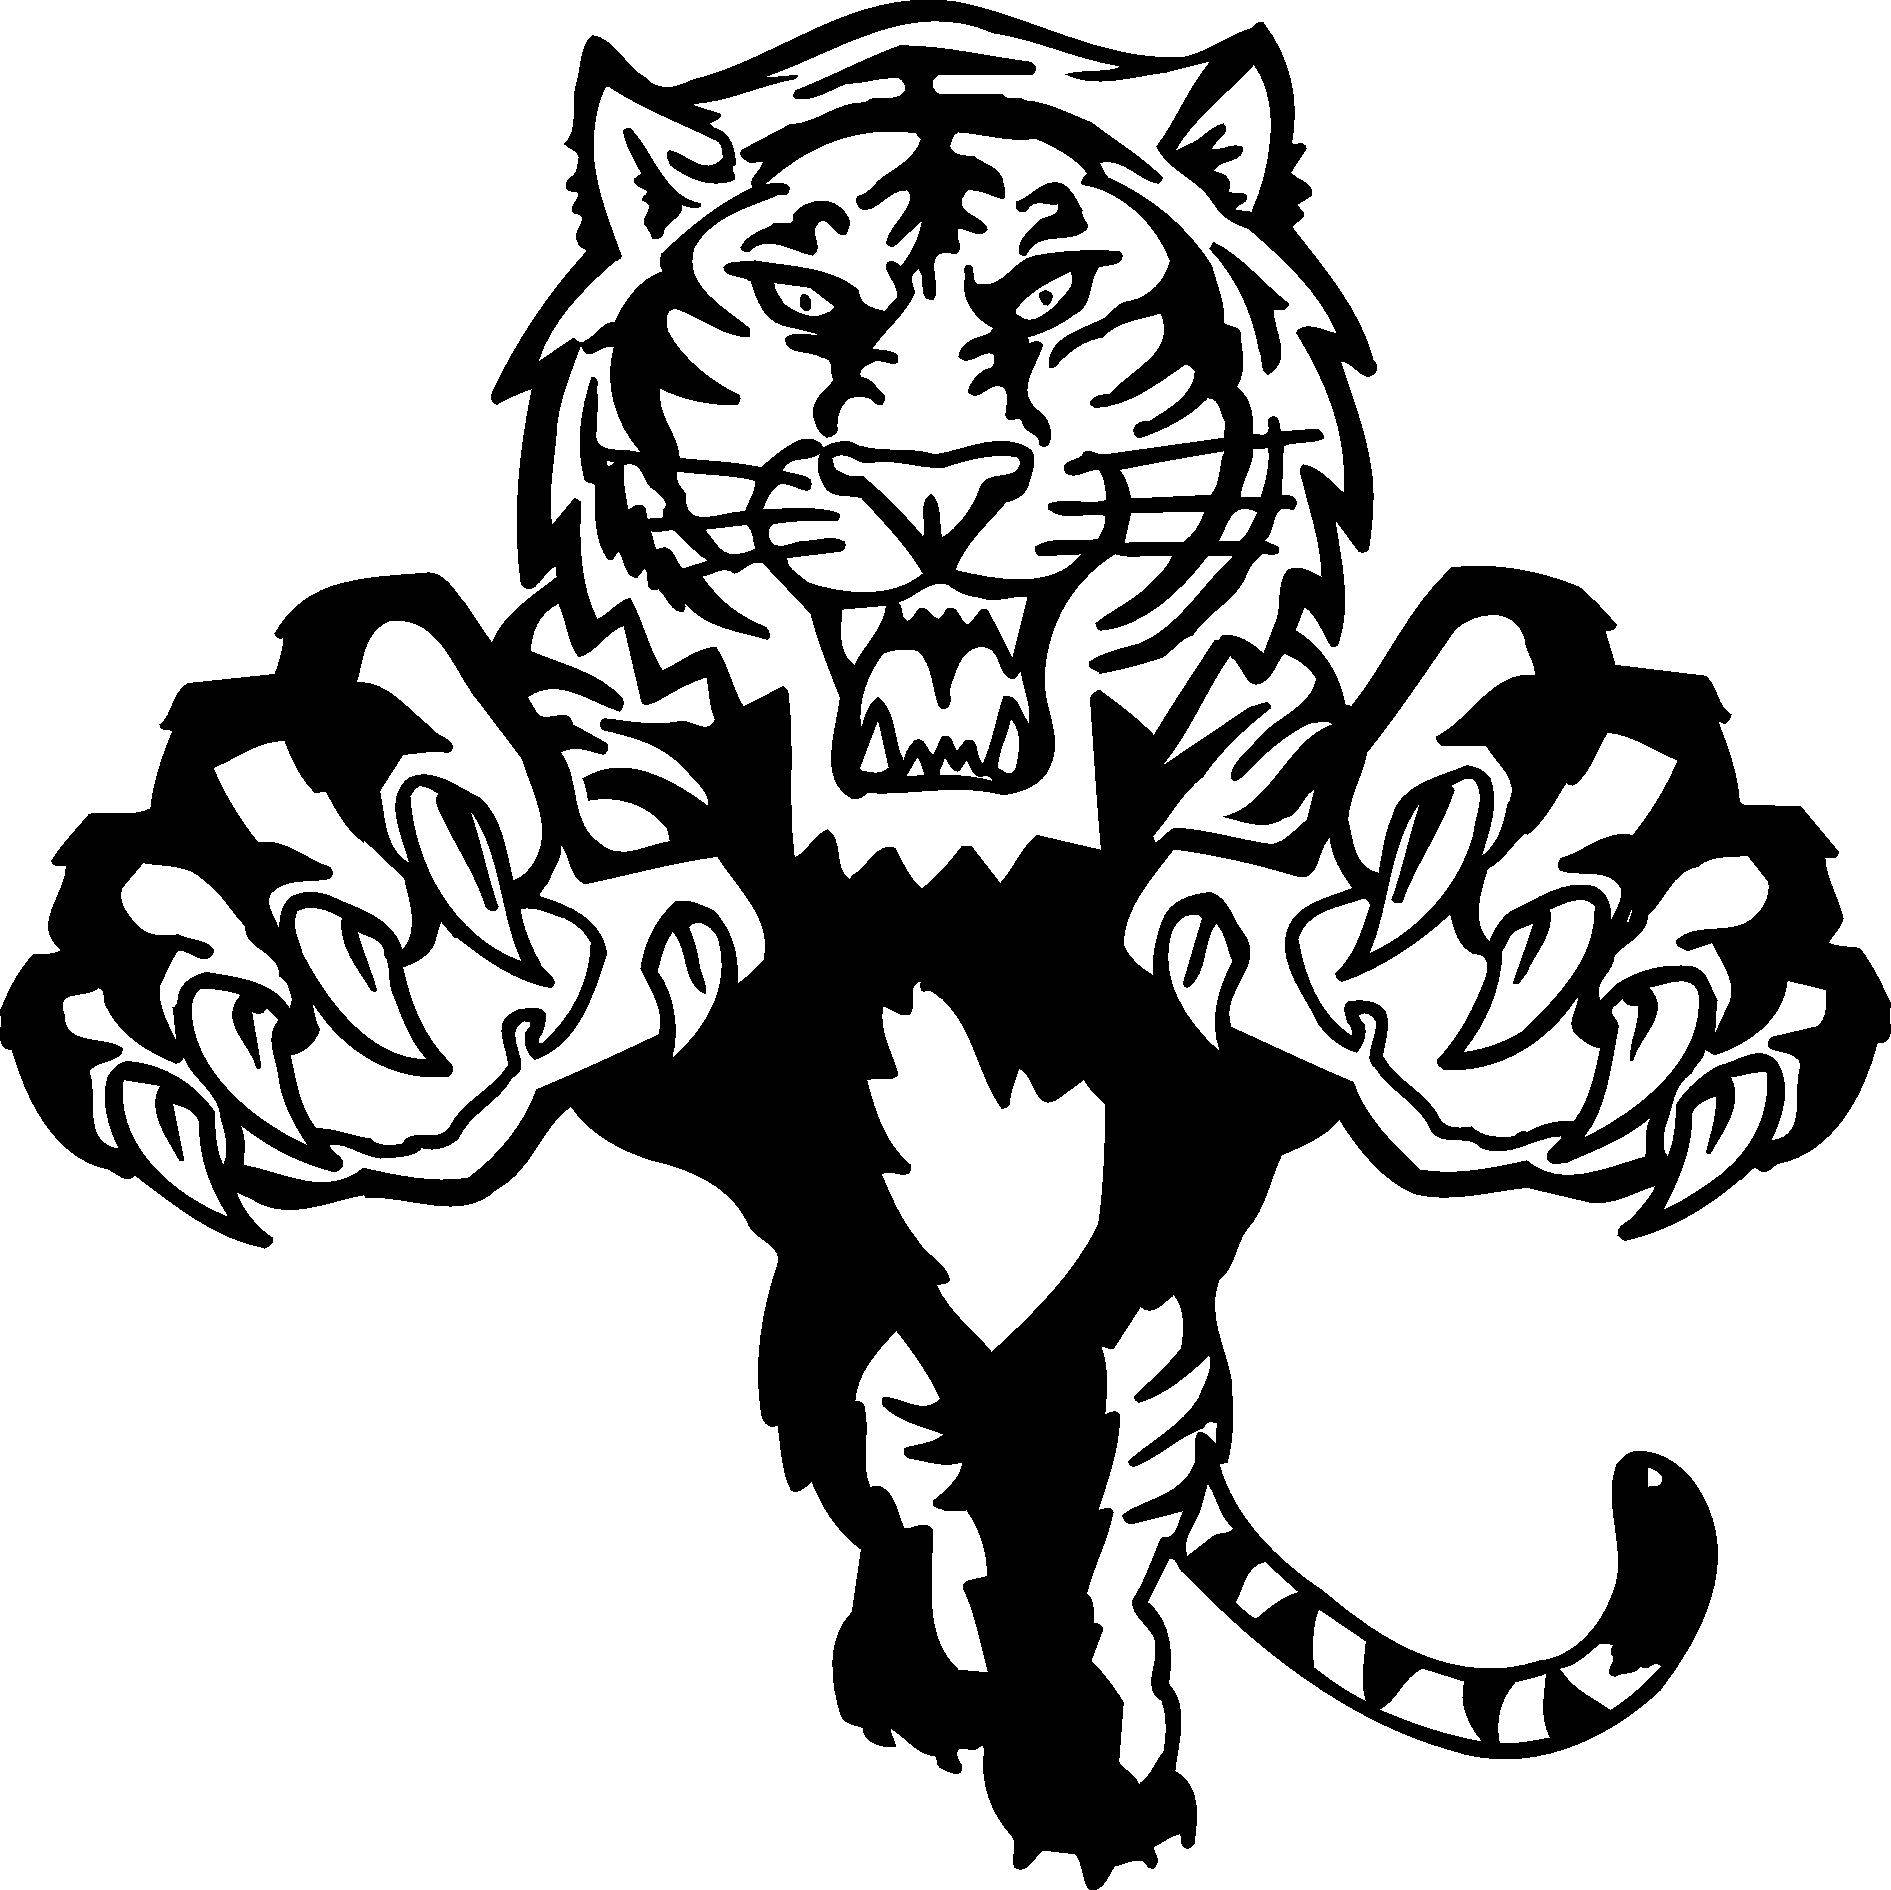 Tiger Paw Coloring Page - Coloring Pages for Kids and for Adults